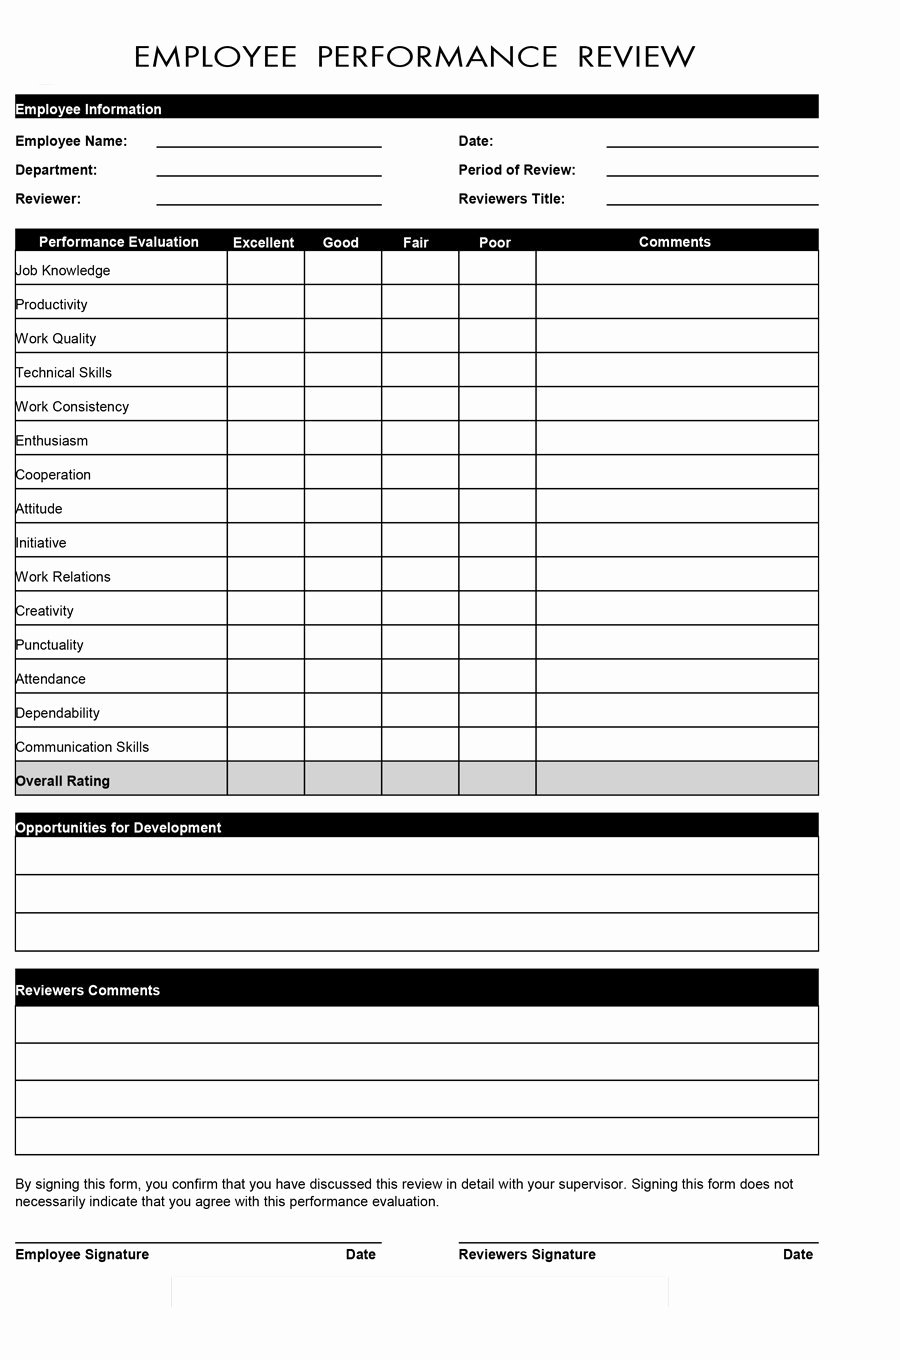 Employee Performance Plan Template Best Of 46 Employee Evaluation forms &amp; Performance Review Examples